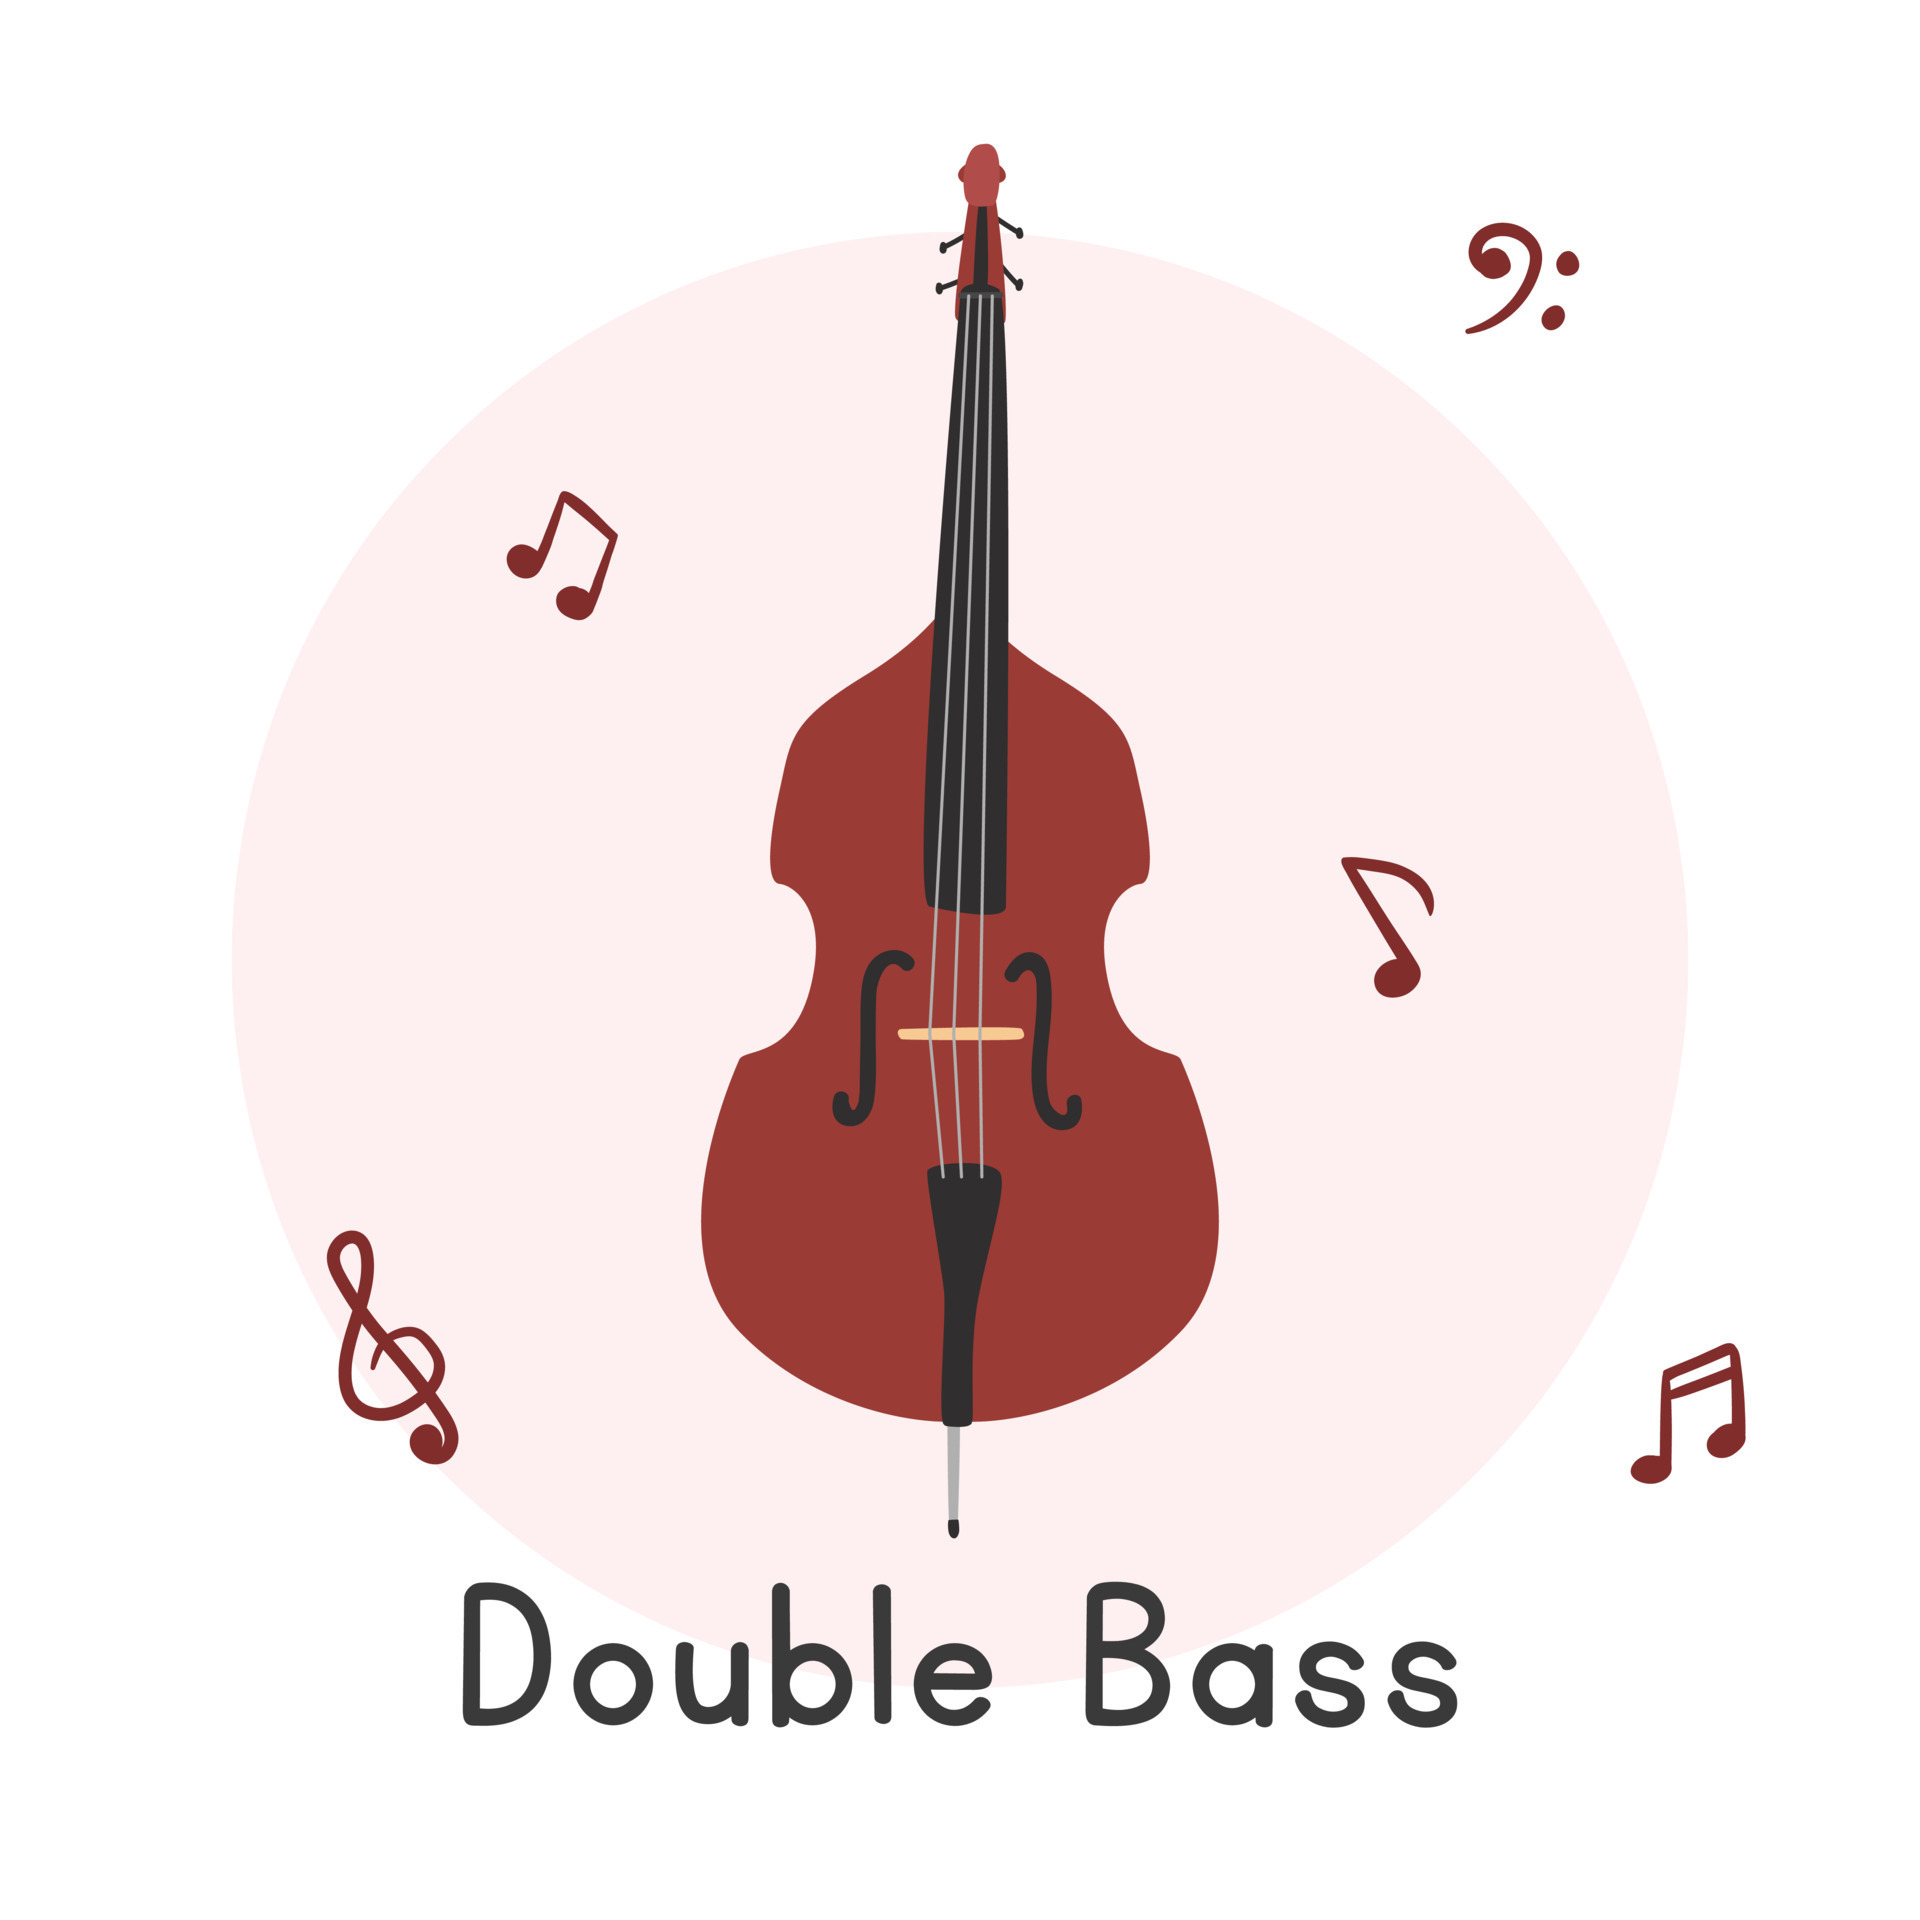 Double bass plays on itself sketch engraving Vector Image